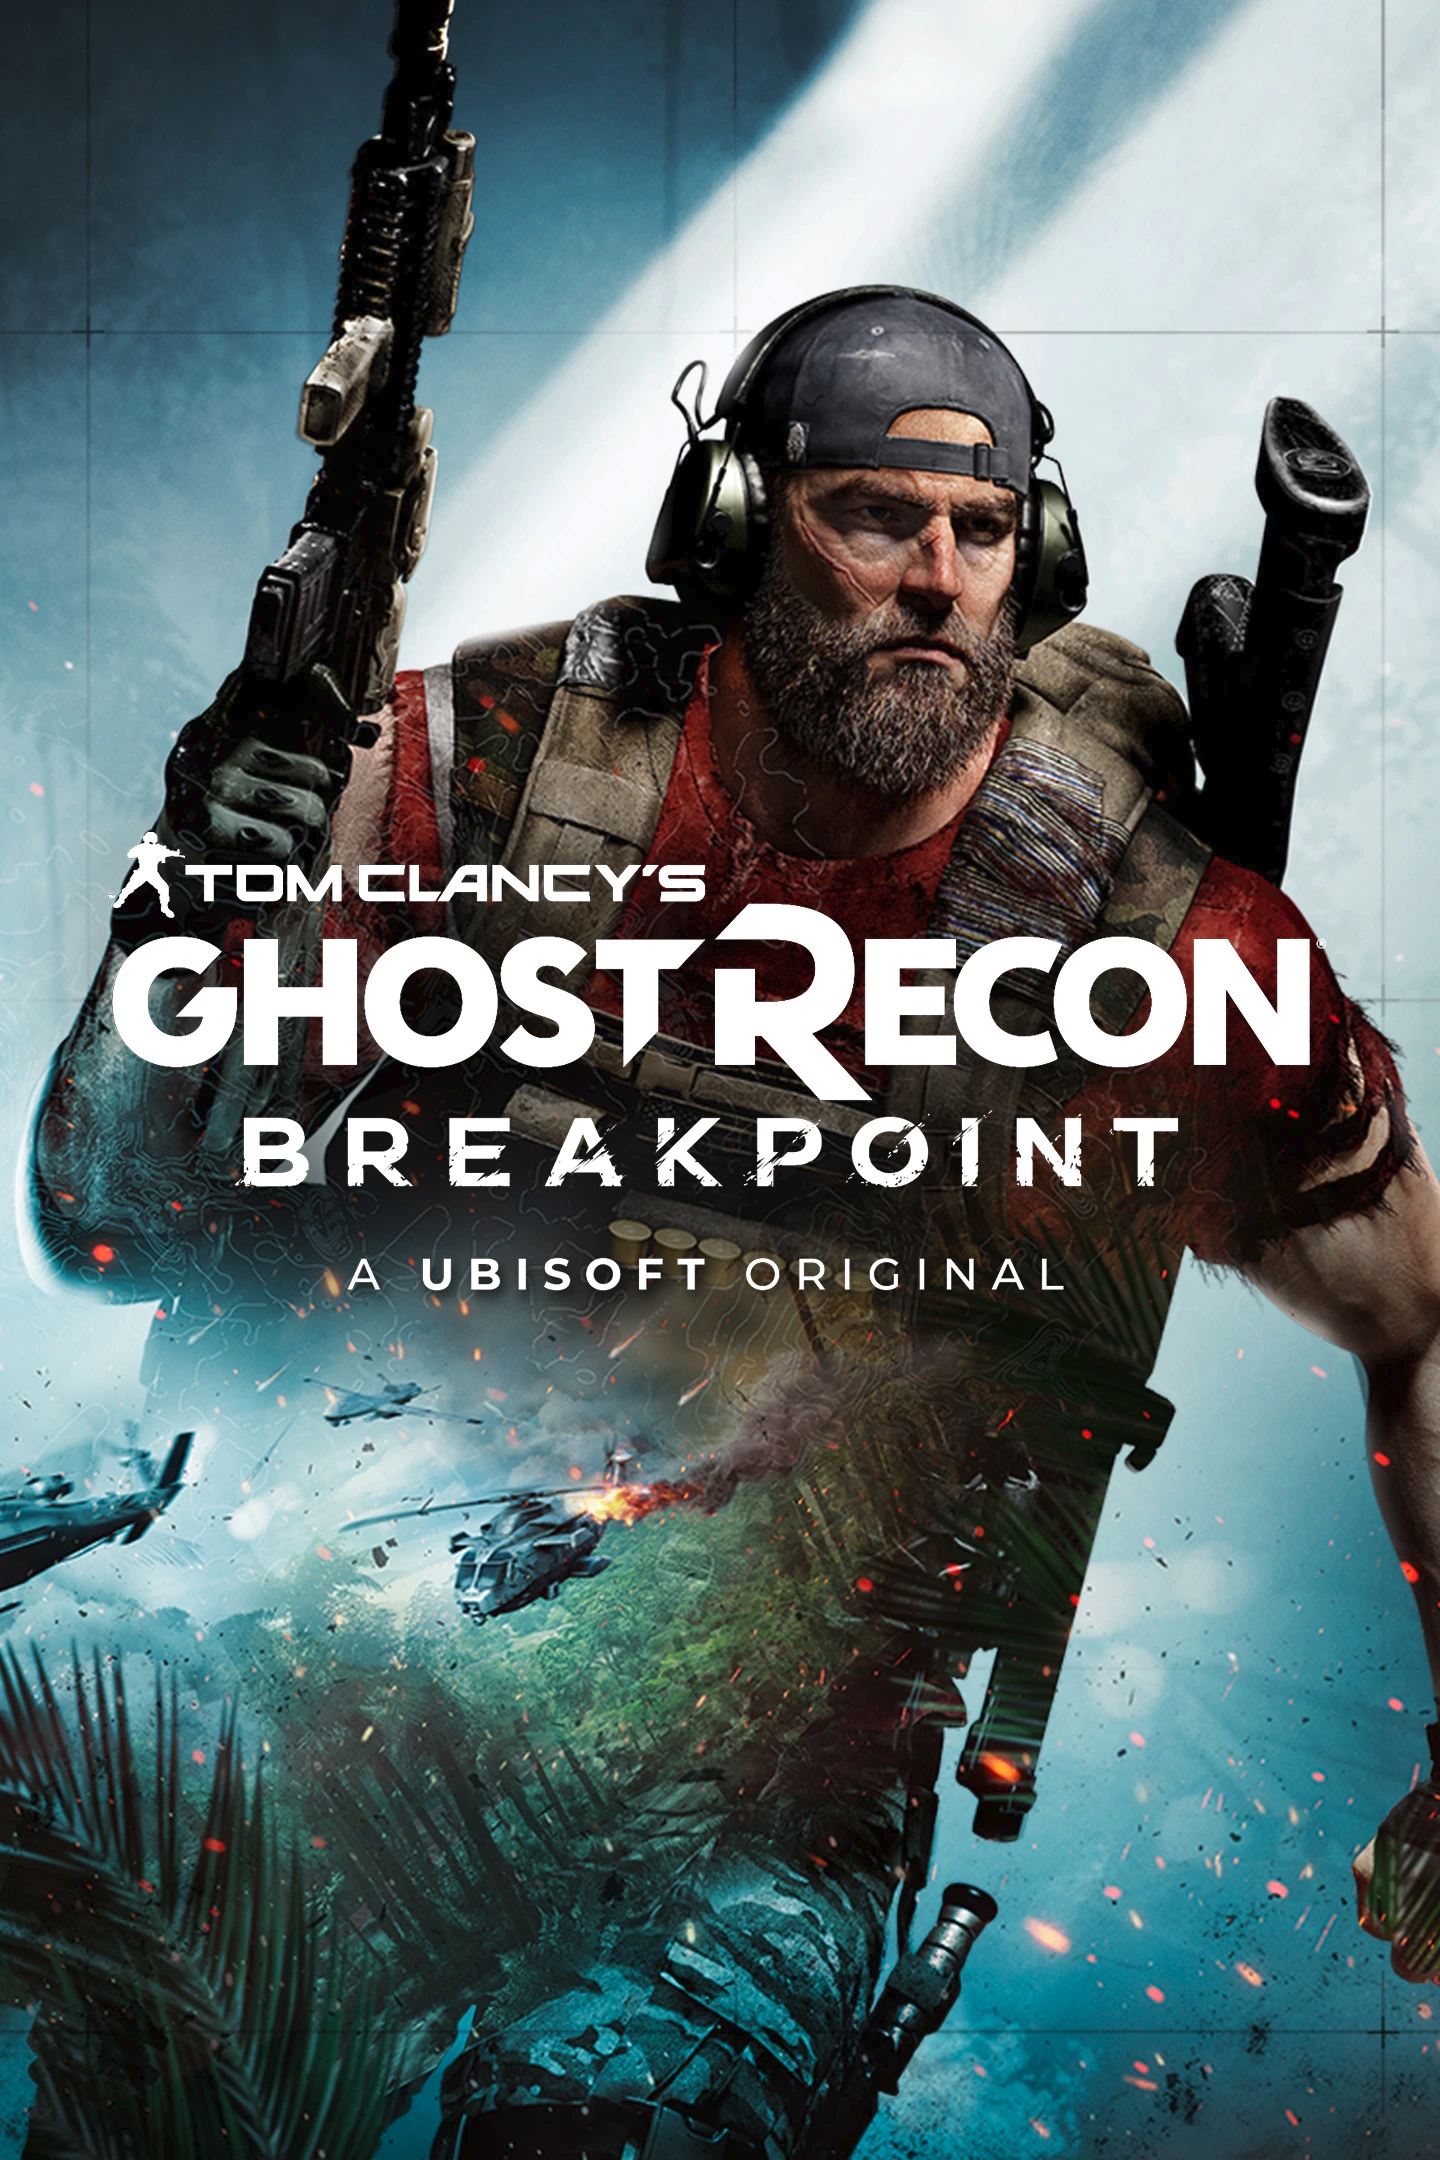 Tom Clancy's Ghost Recon Frontline Gaming Wallpapers